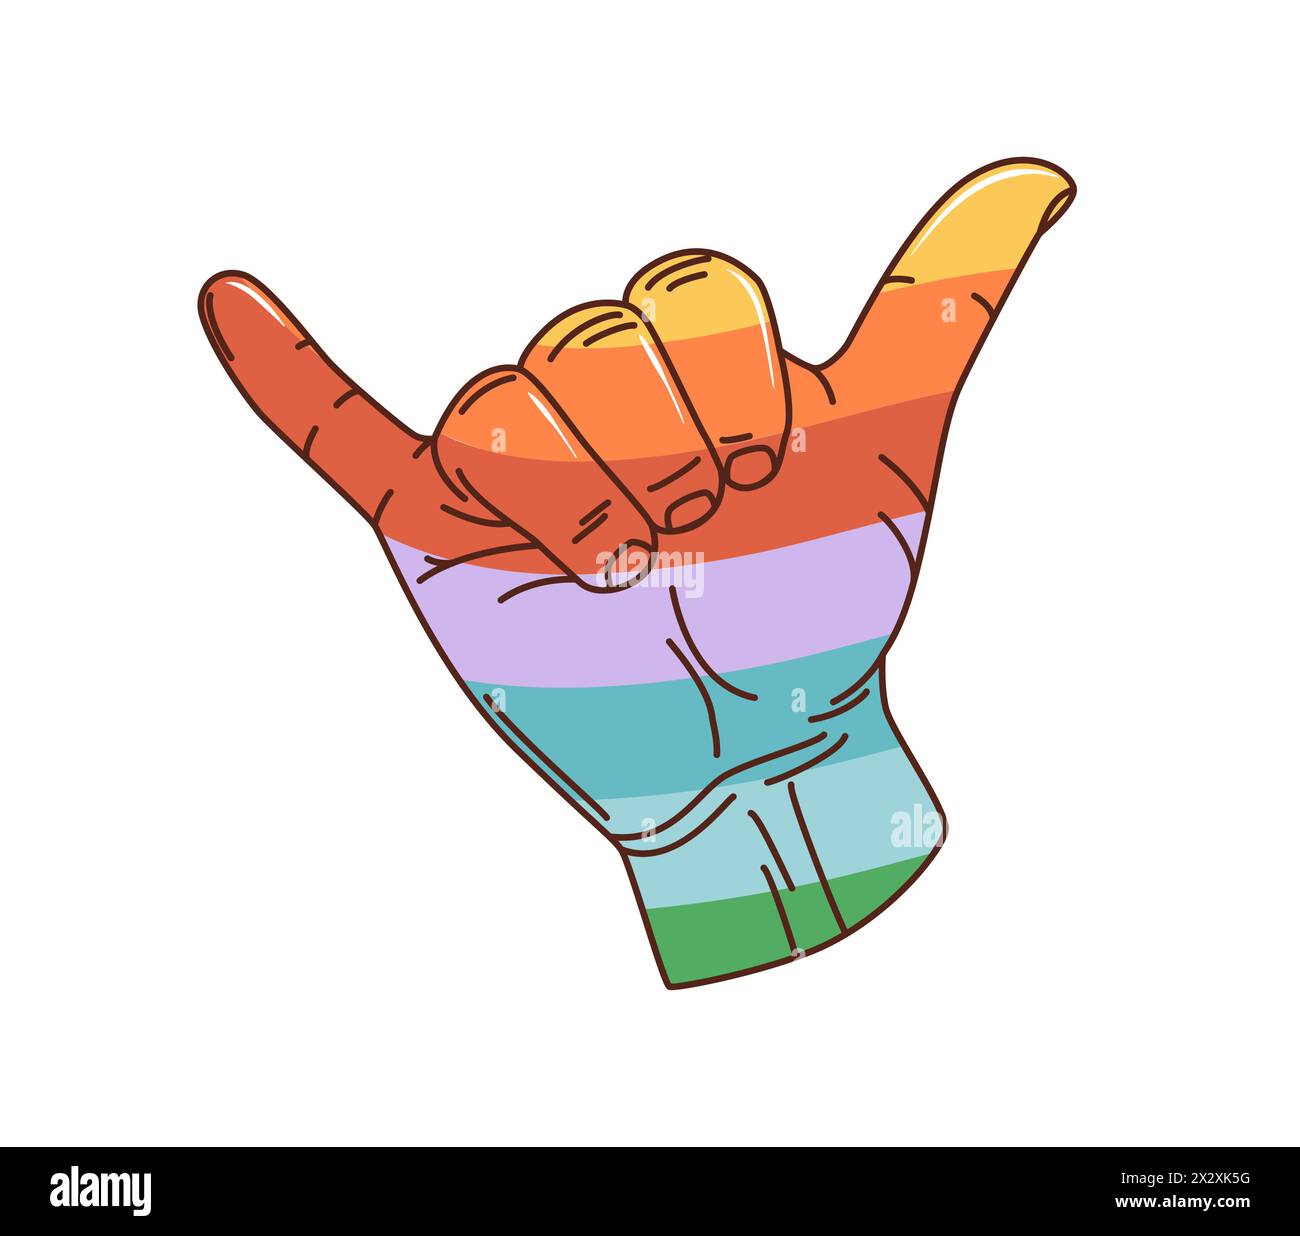 Cartoon retro groovy aloha shaka gesture. Isolated vector surf hand sign meaning a warm greeting, expressing goodwill, relaxation, and a laid-back attitude. Human palm with rainbow pattern and fingers Stock Vector